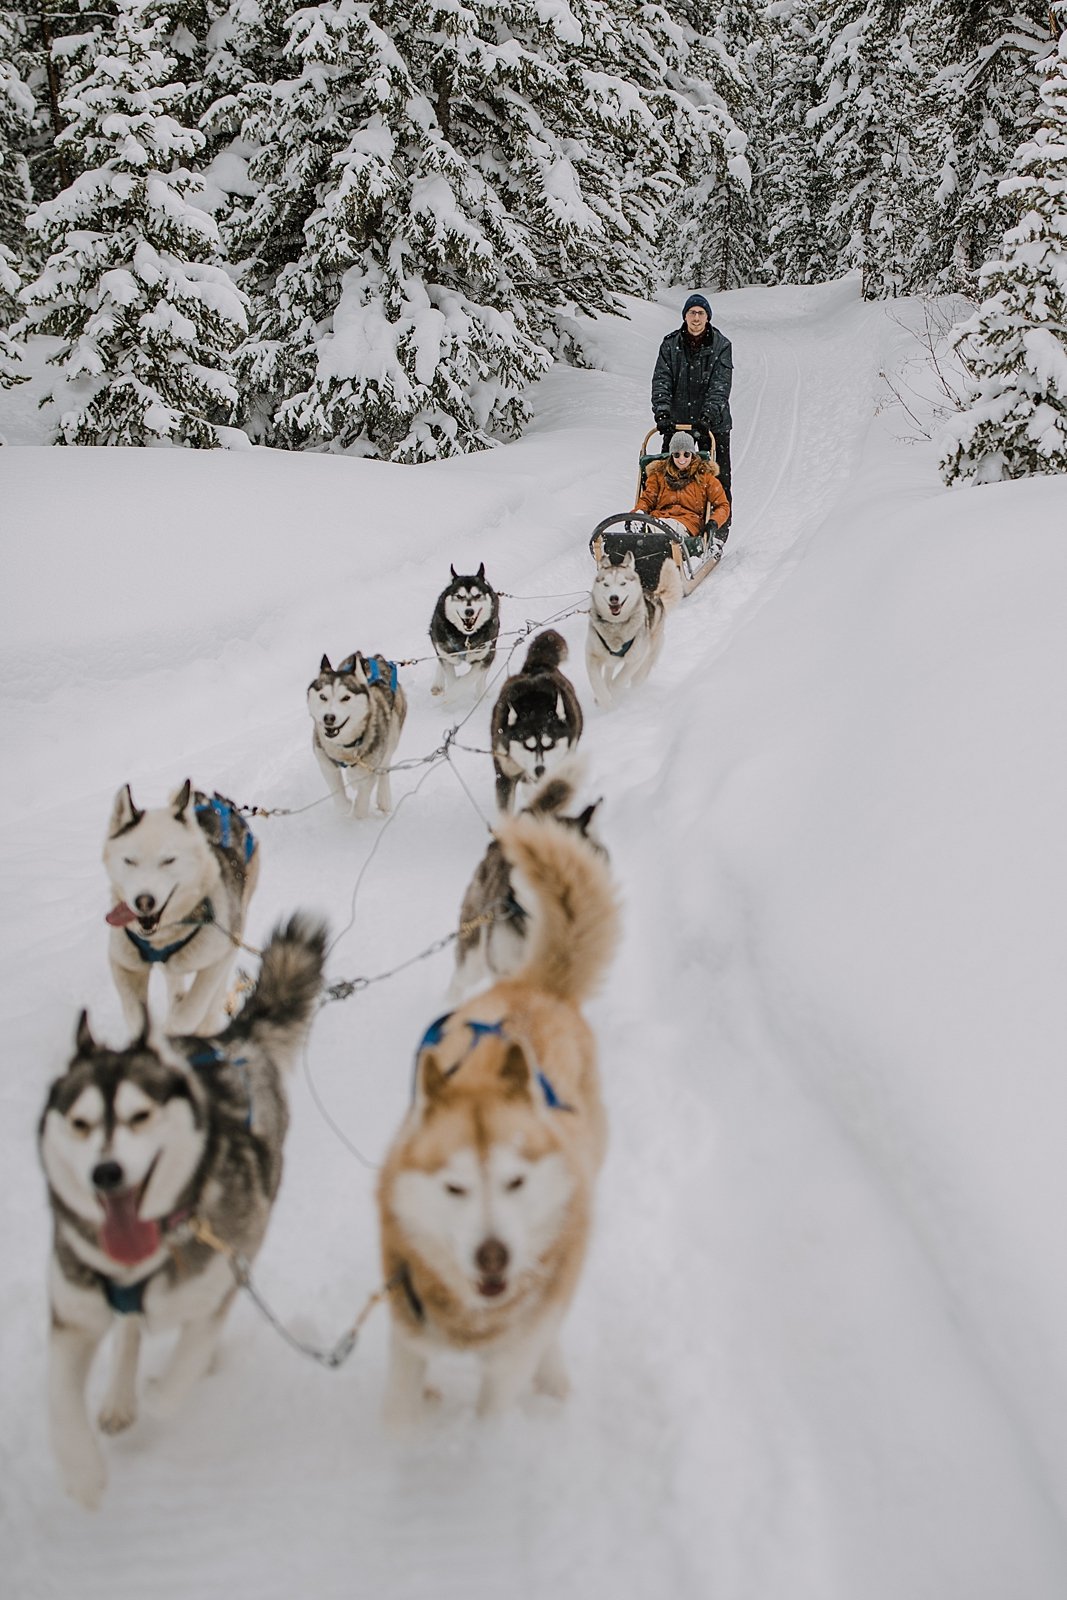 couple riding on dogsled together, breckenridge dogsledding tour, goodtimes adventures dogsled proposal, goodtimes adventures dogsledding engagements, colorado dogsledding, tiger road dogsledding